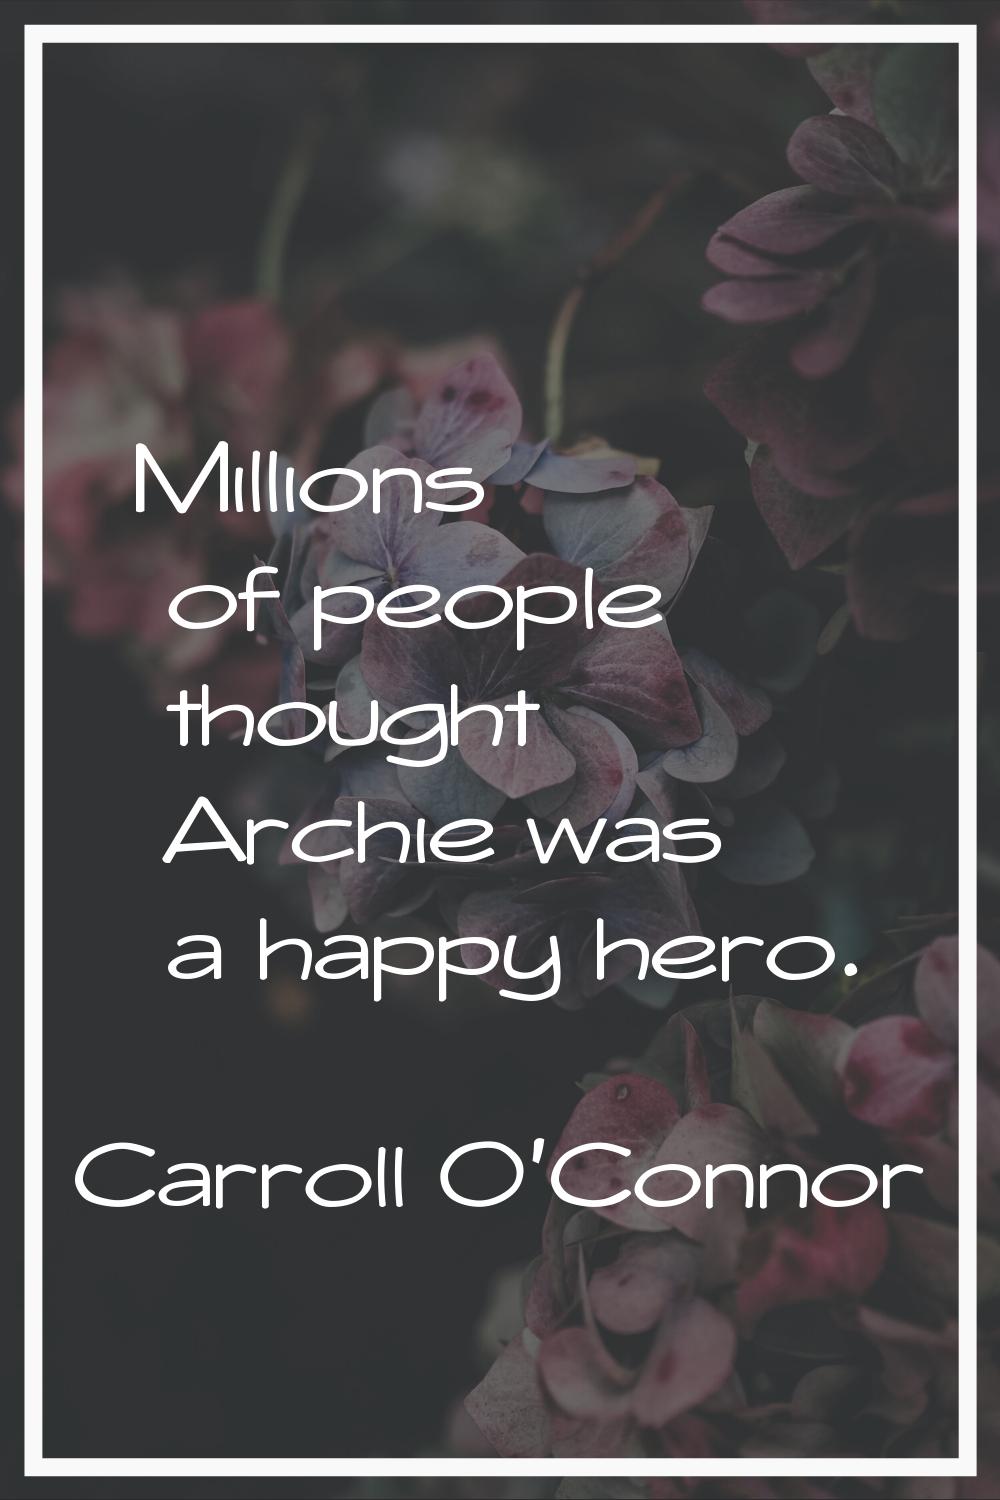 Millions of people thought Archie was a happy hero.